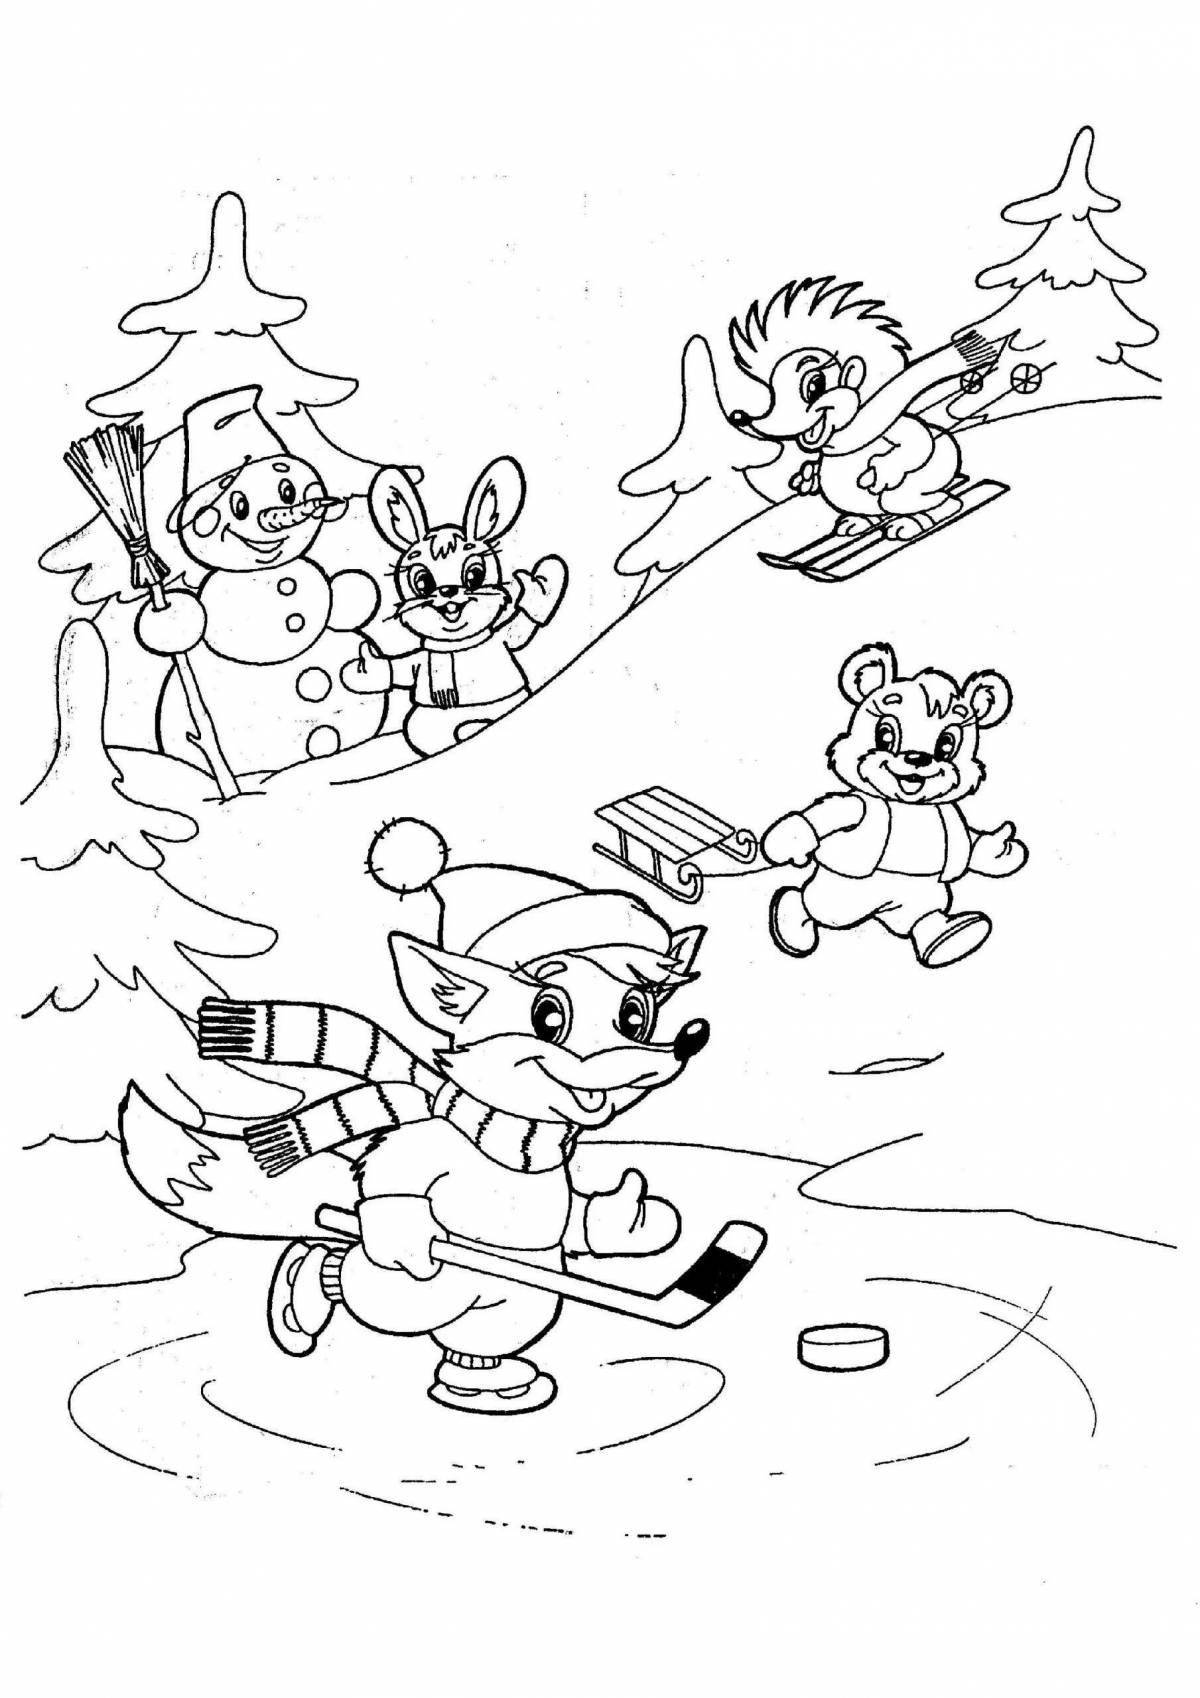 Fantastic animals coloring pages in winter